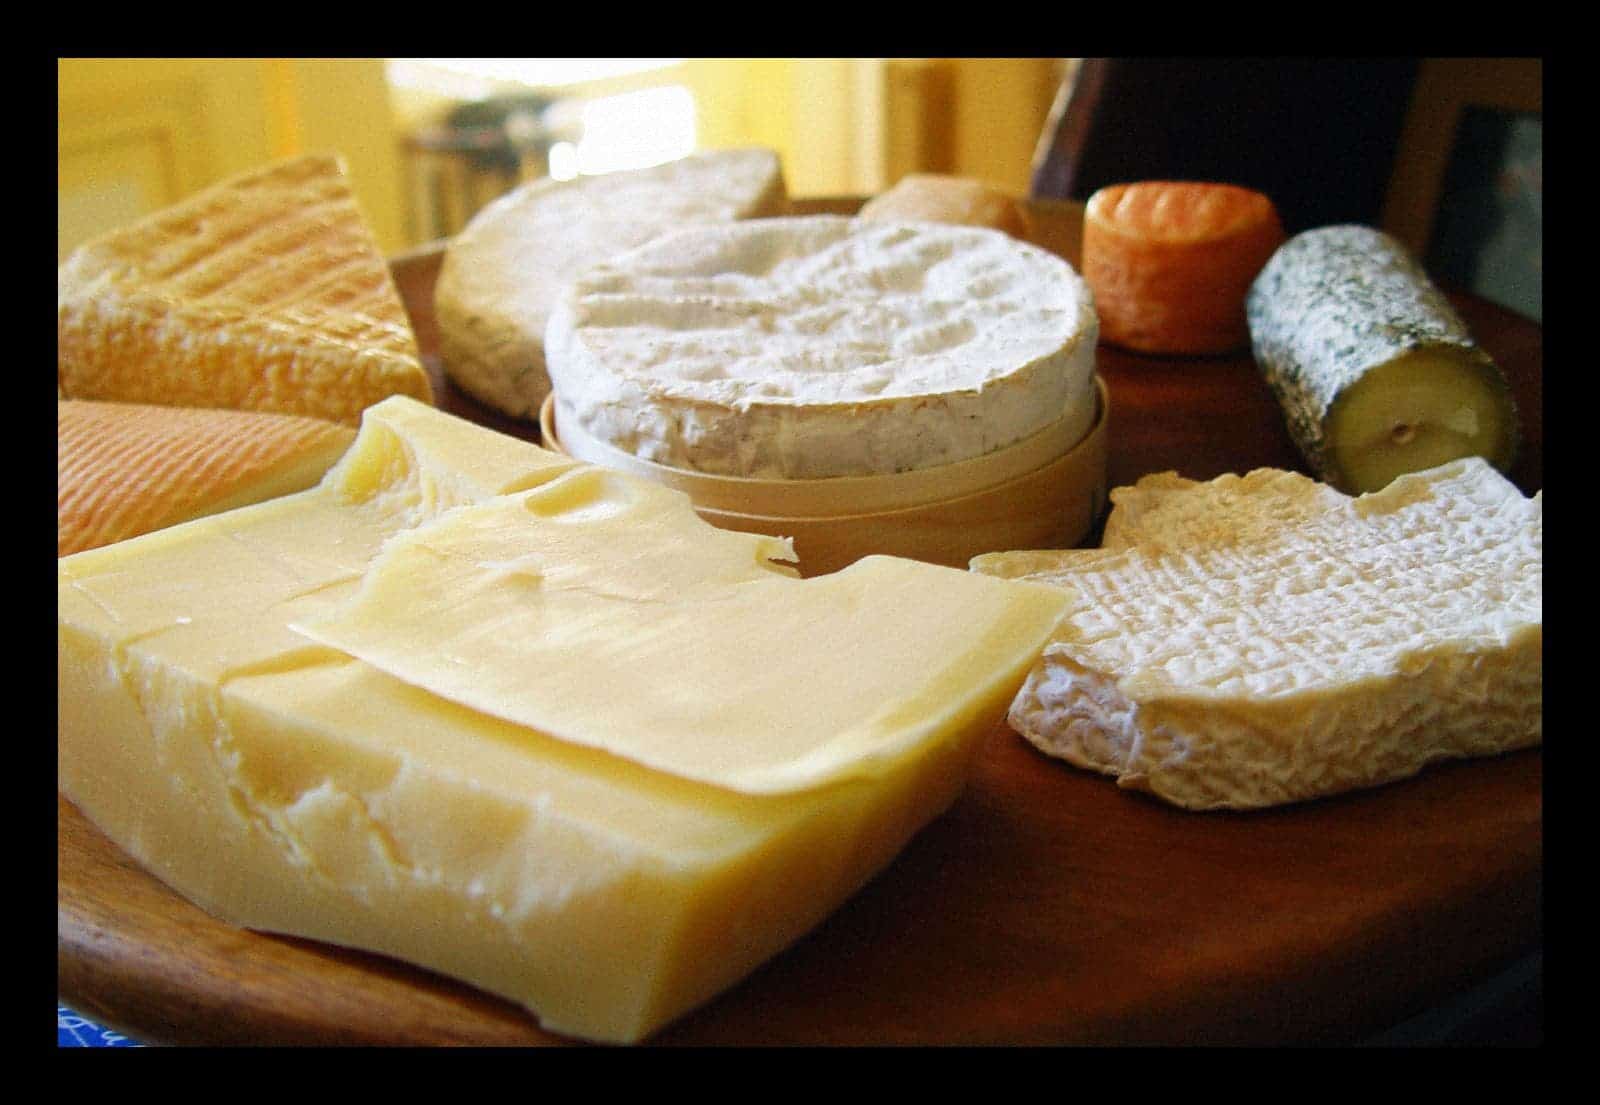 Cheese might not be as bad for you as we thought. Image credits: Chris Buecheler.